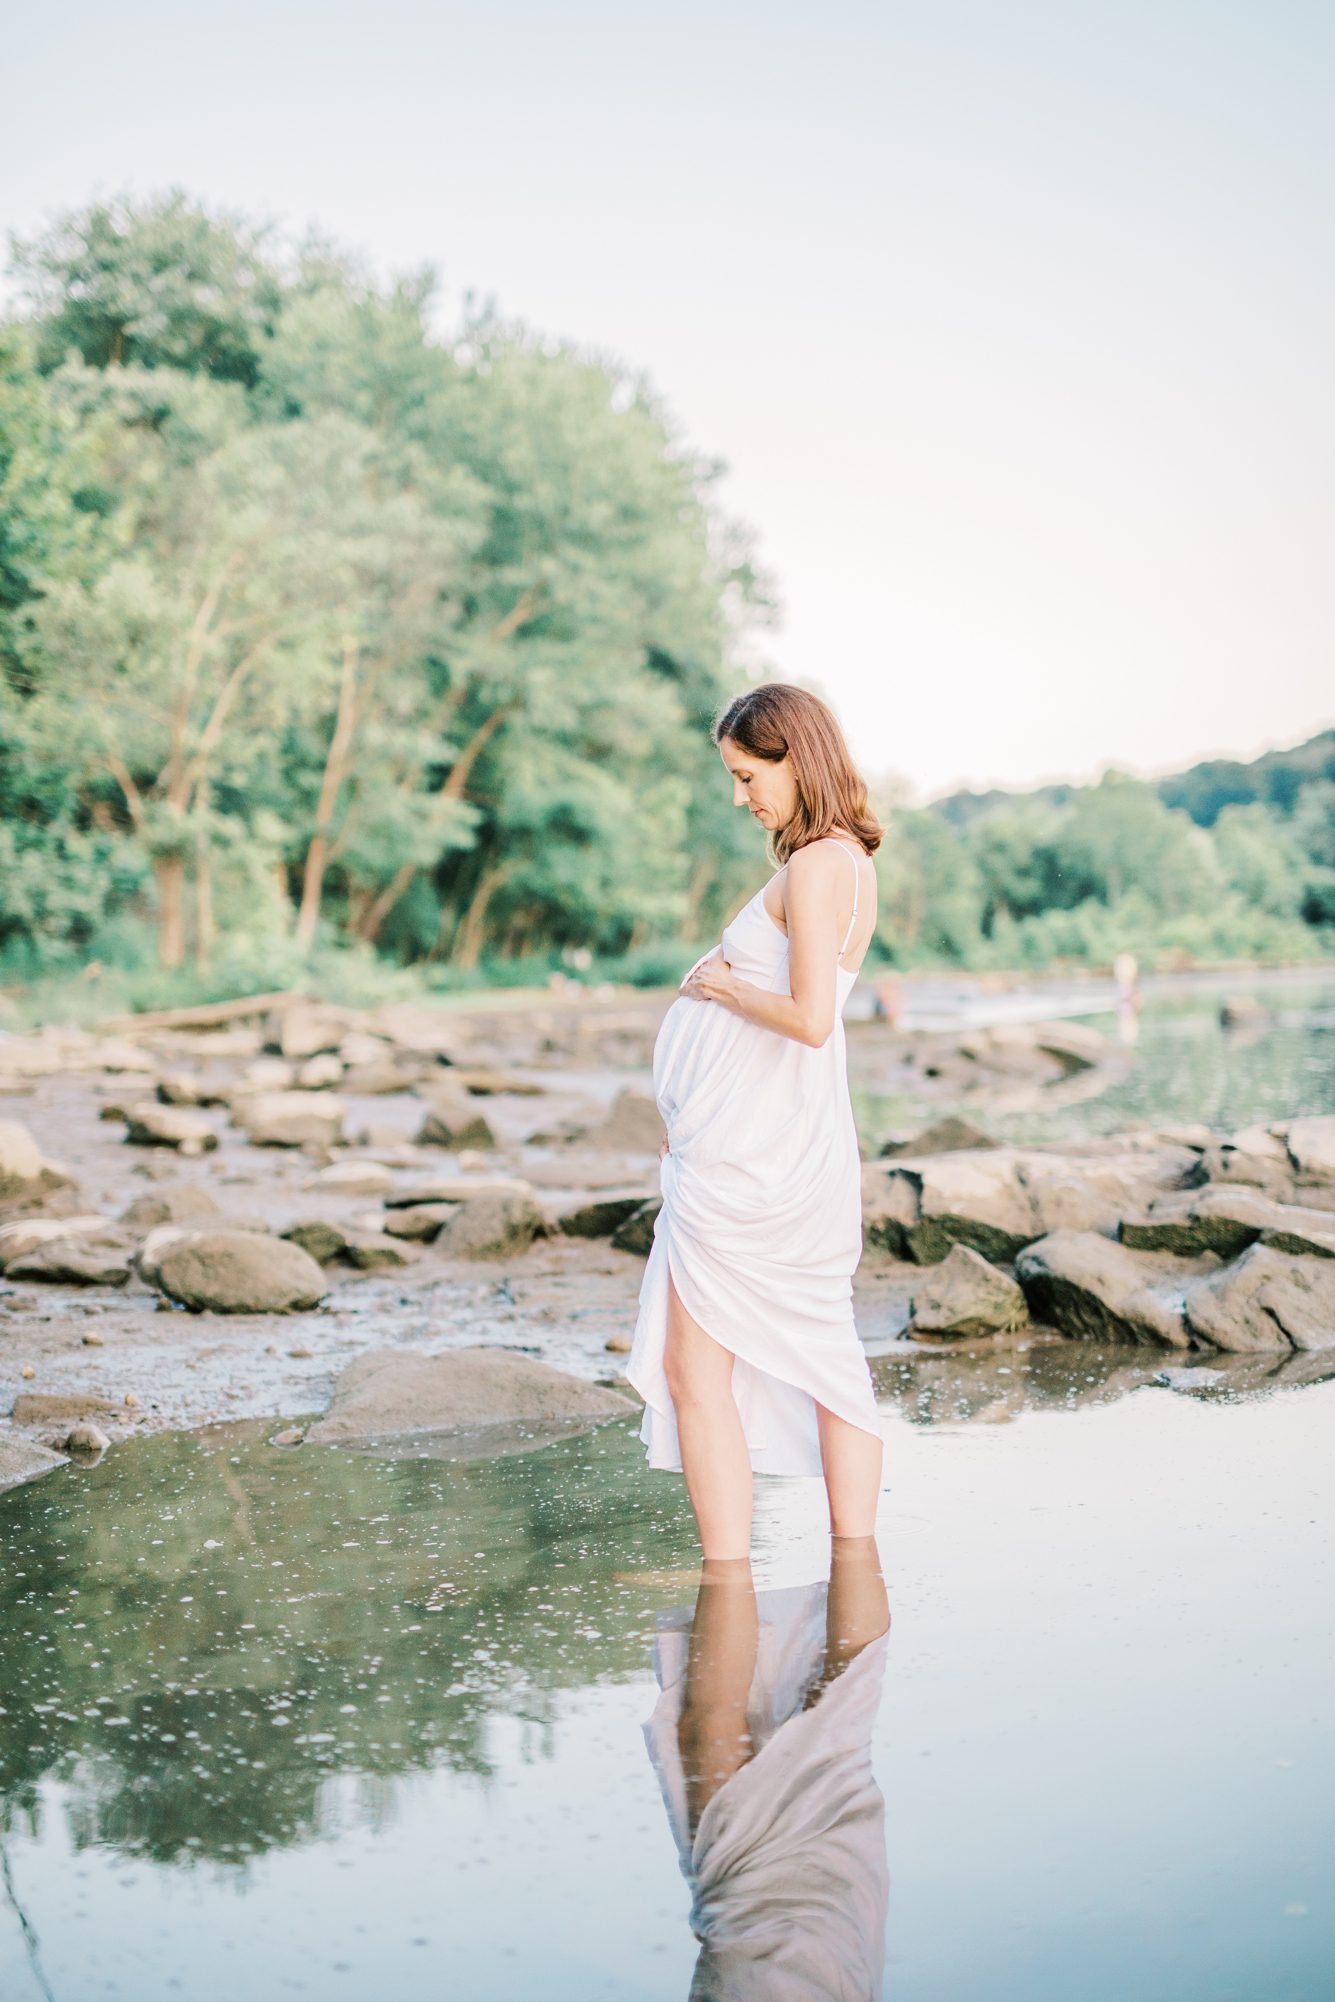 Mom walking in river with reflection in water during Washington DC maternity session. Photo by LRG Portraits.